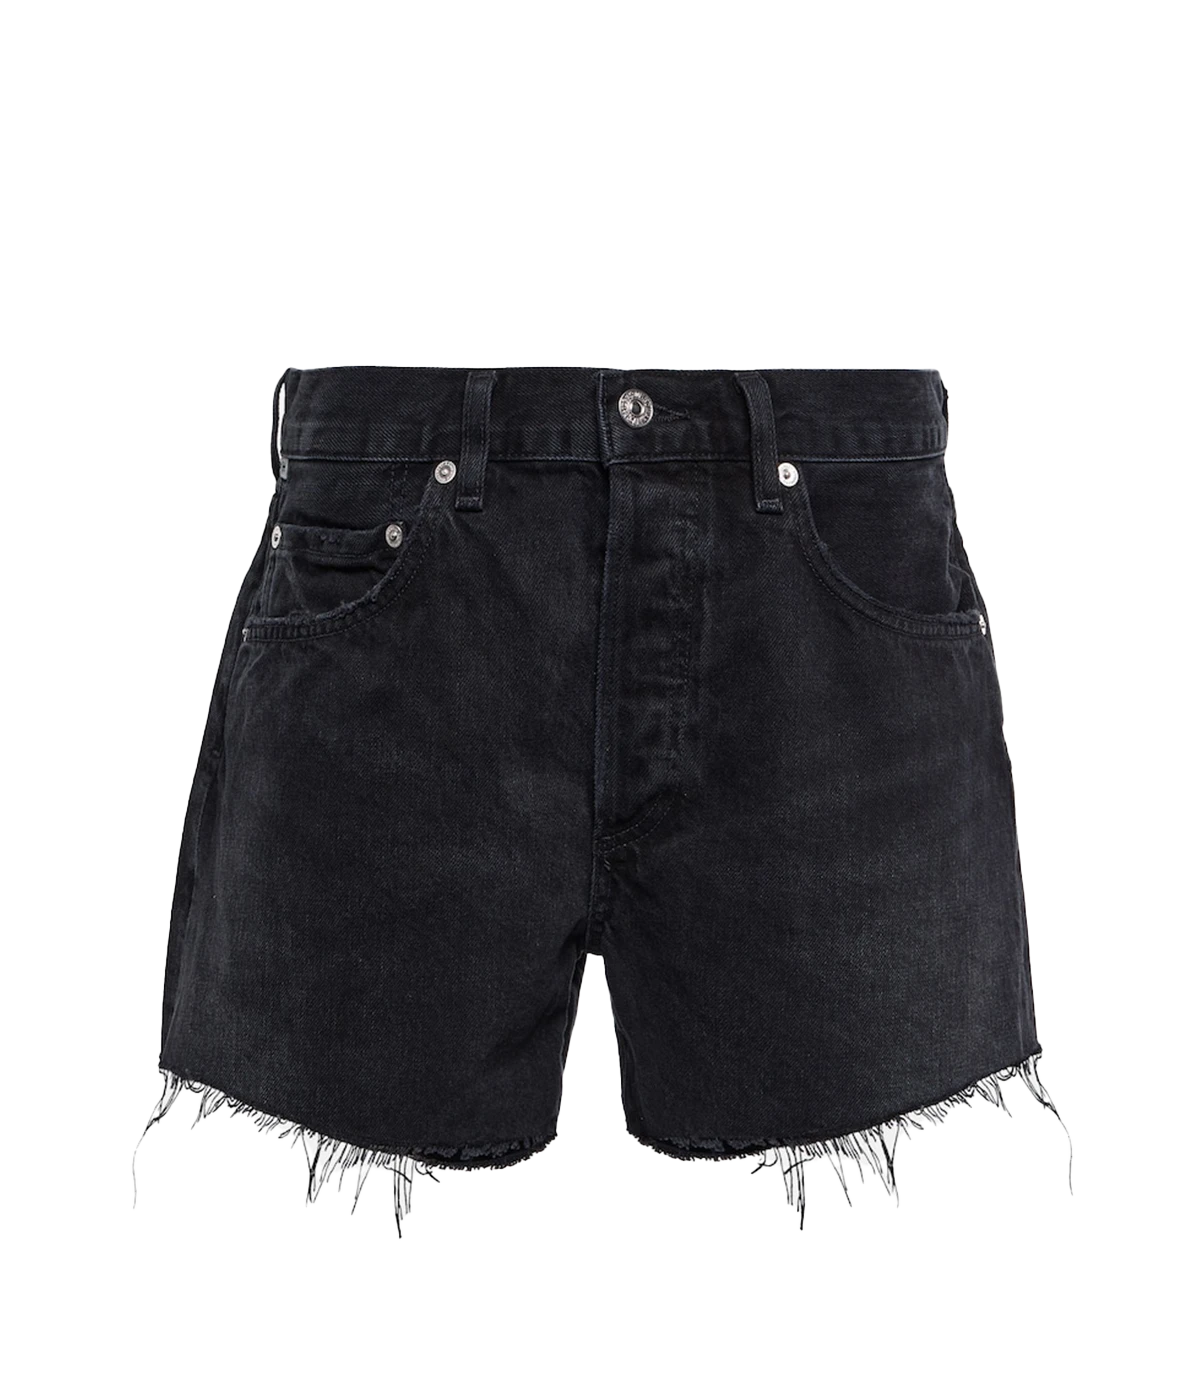 A vintage distressed denim short in a washed black colourway, featuring silver hardware, zip and button closure, distressed hem, rips and cut off style. Summer Short, comfortable, rigid denim, throw on and go, made in USA, Cotton.